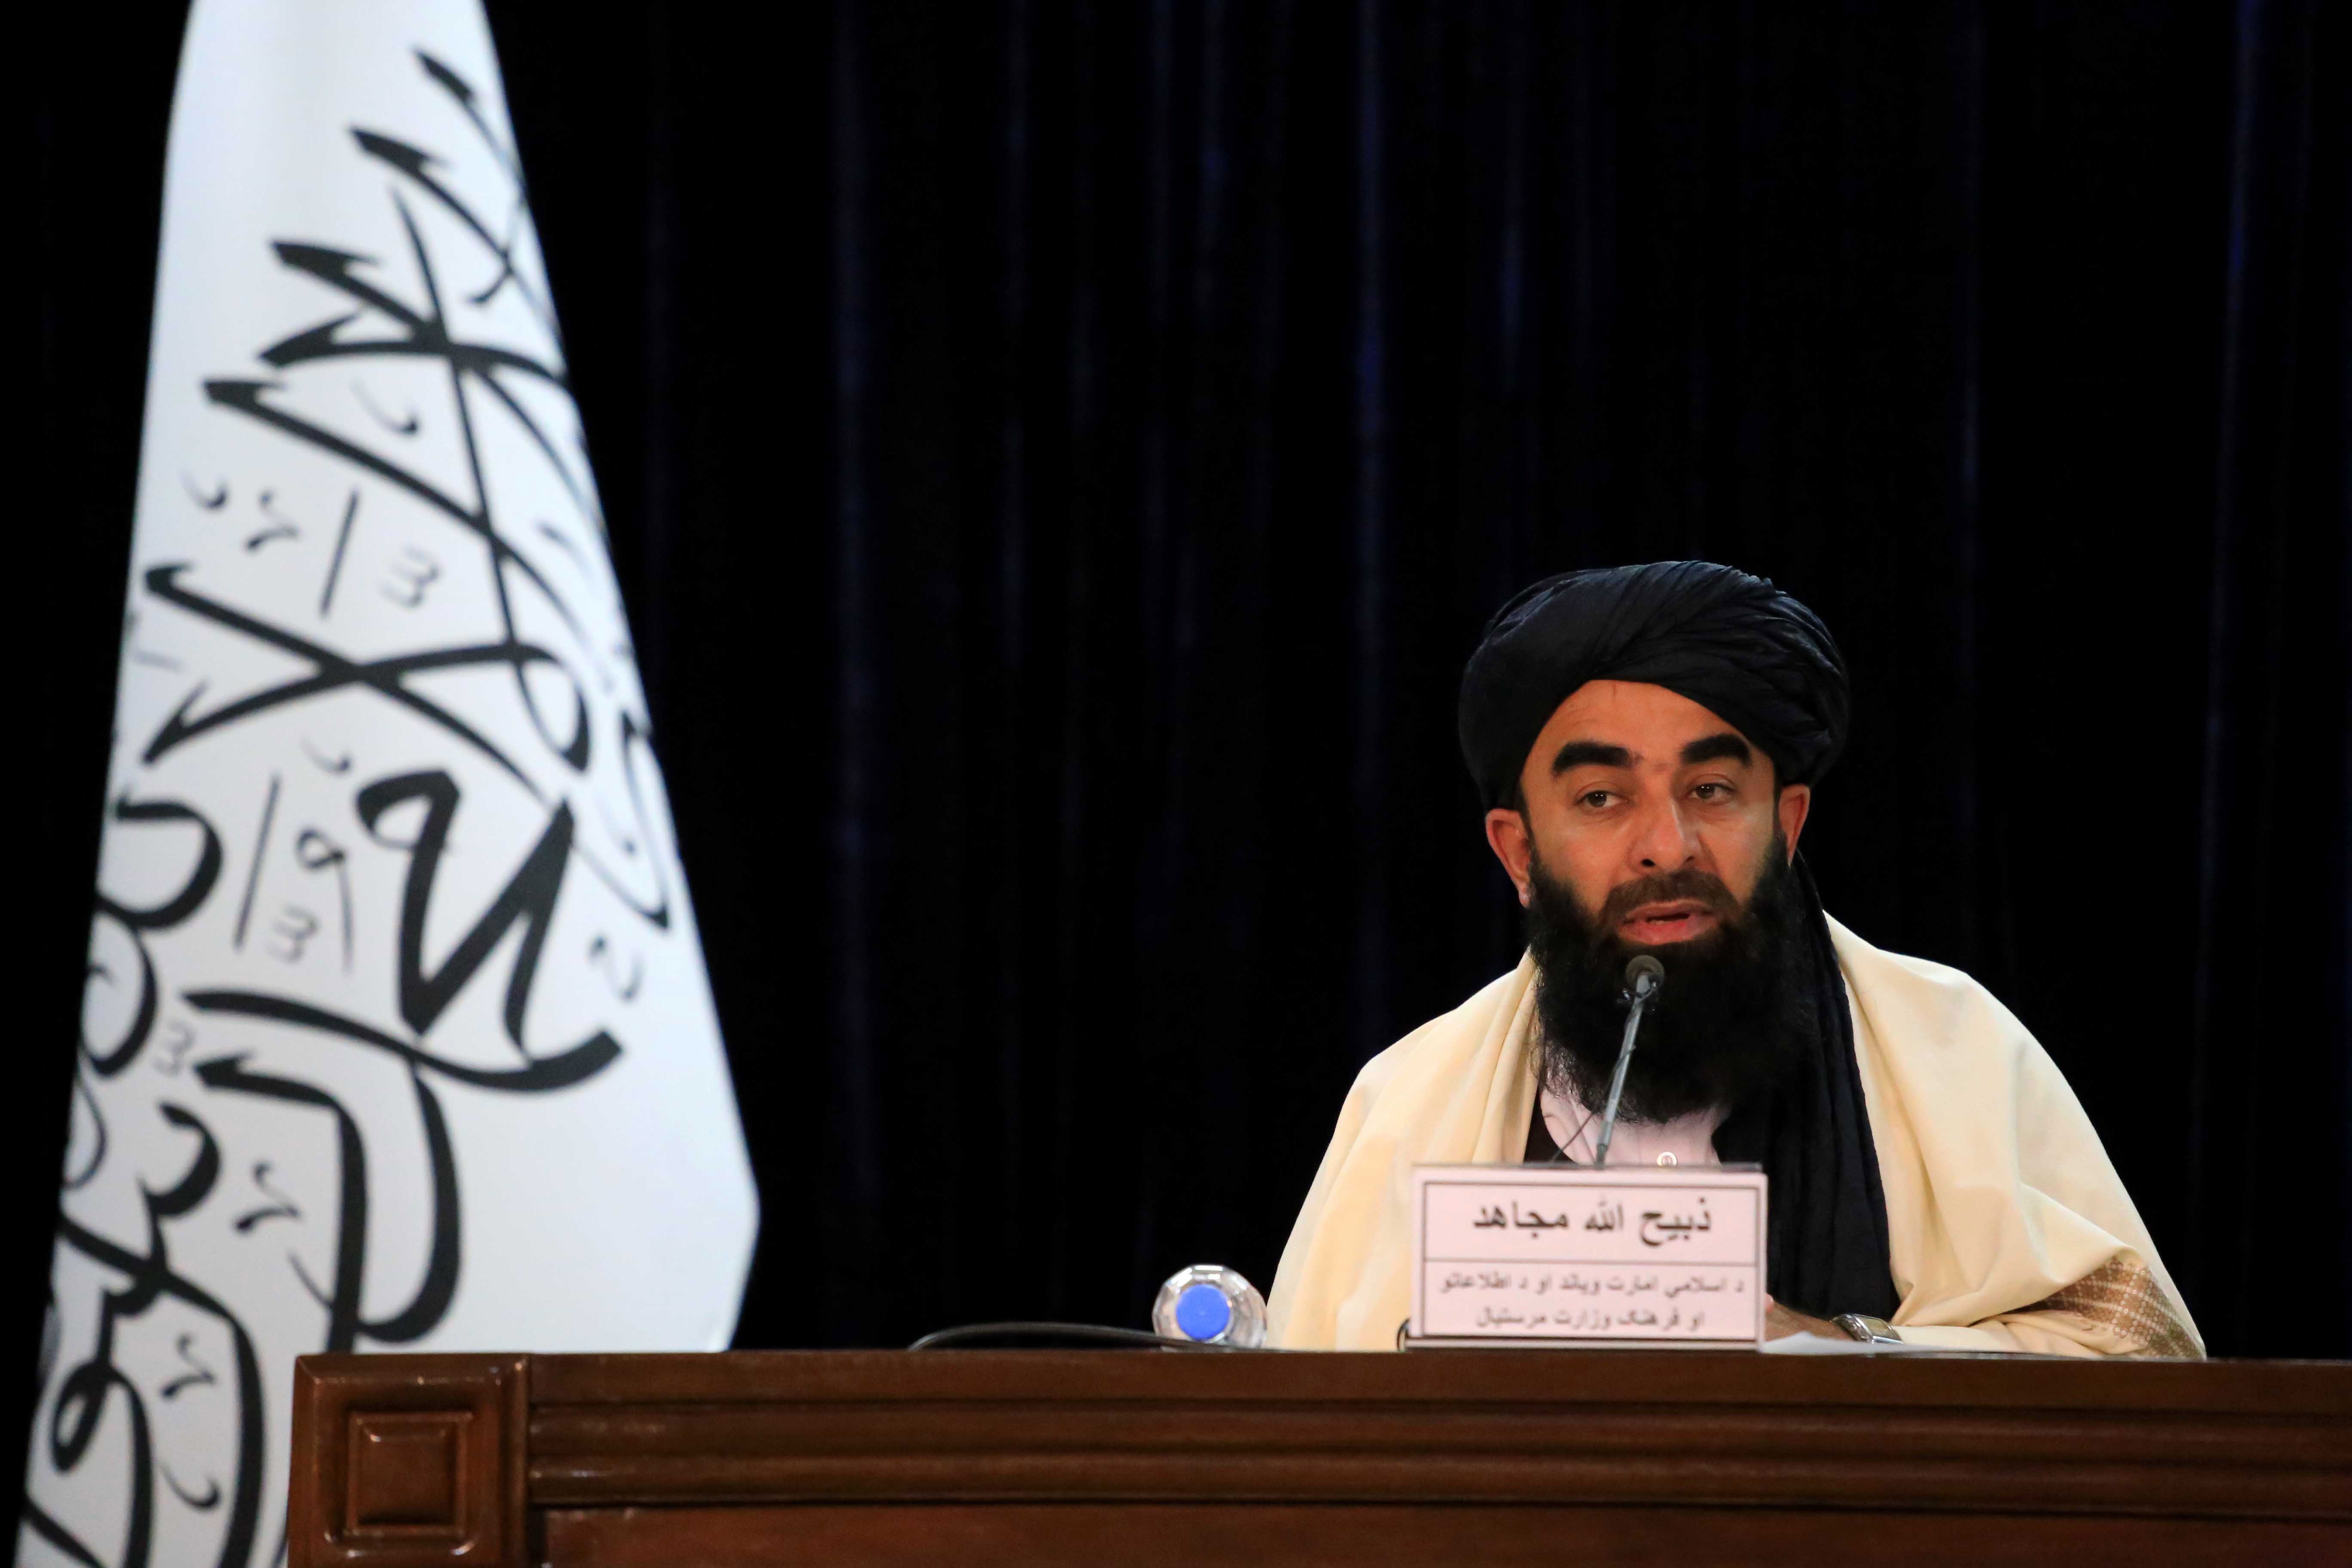 Zabihullah Mujahid, the Taliban's spokesman talks with journalists during a press conference in Kabul, Afghanistan on 27 February 2022